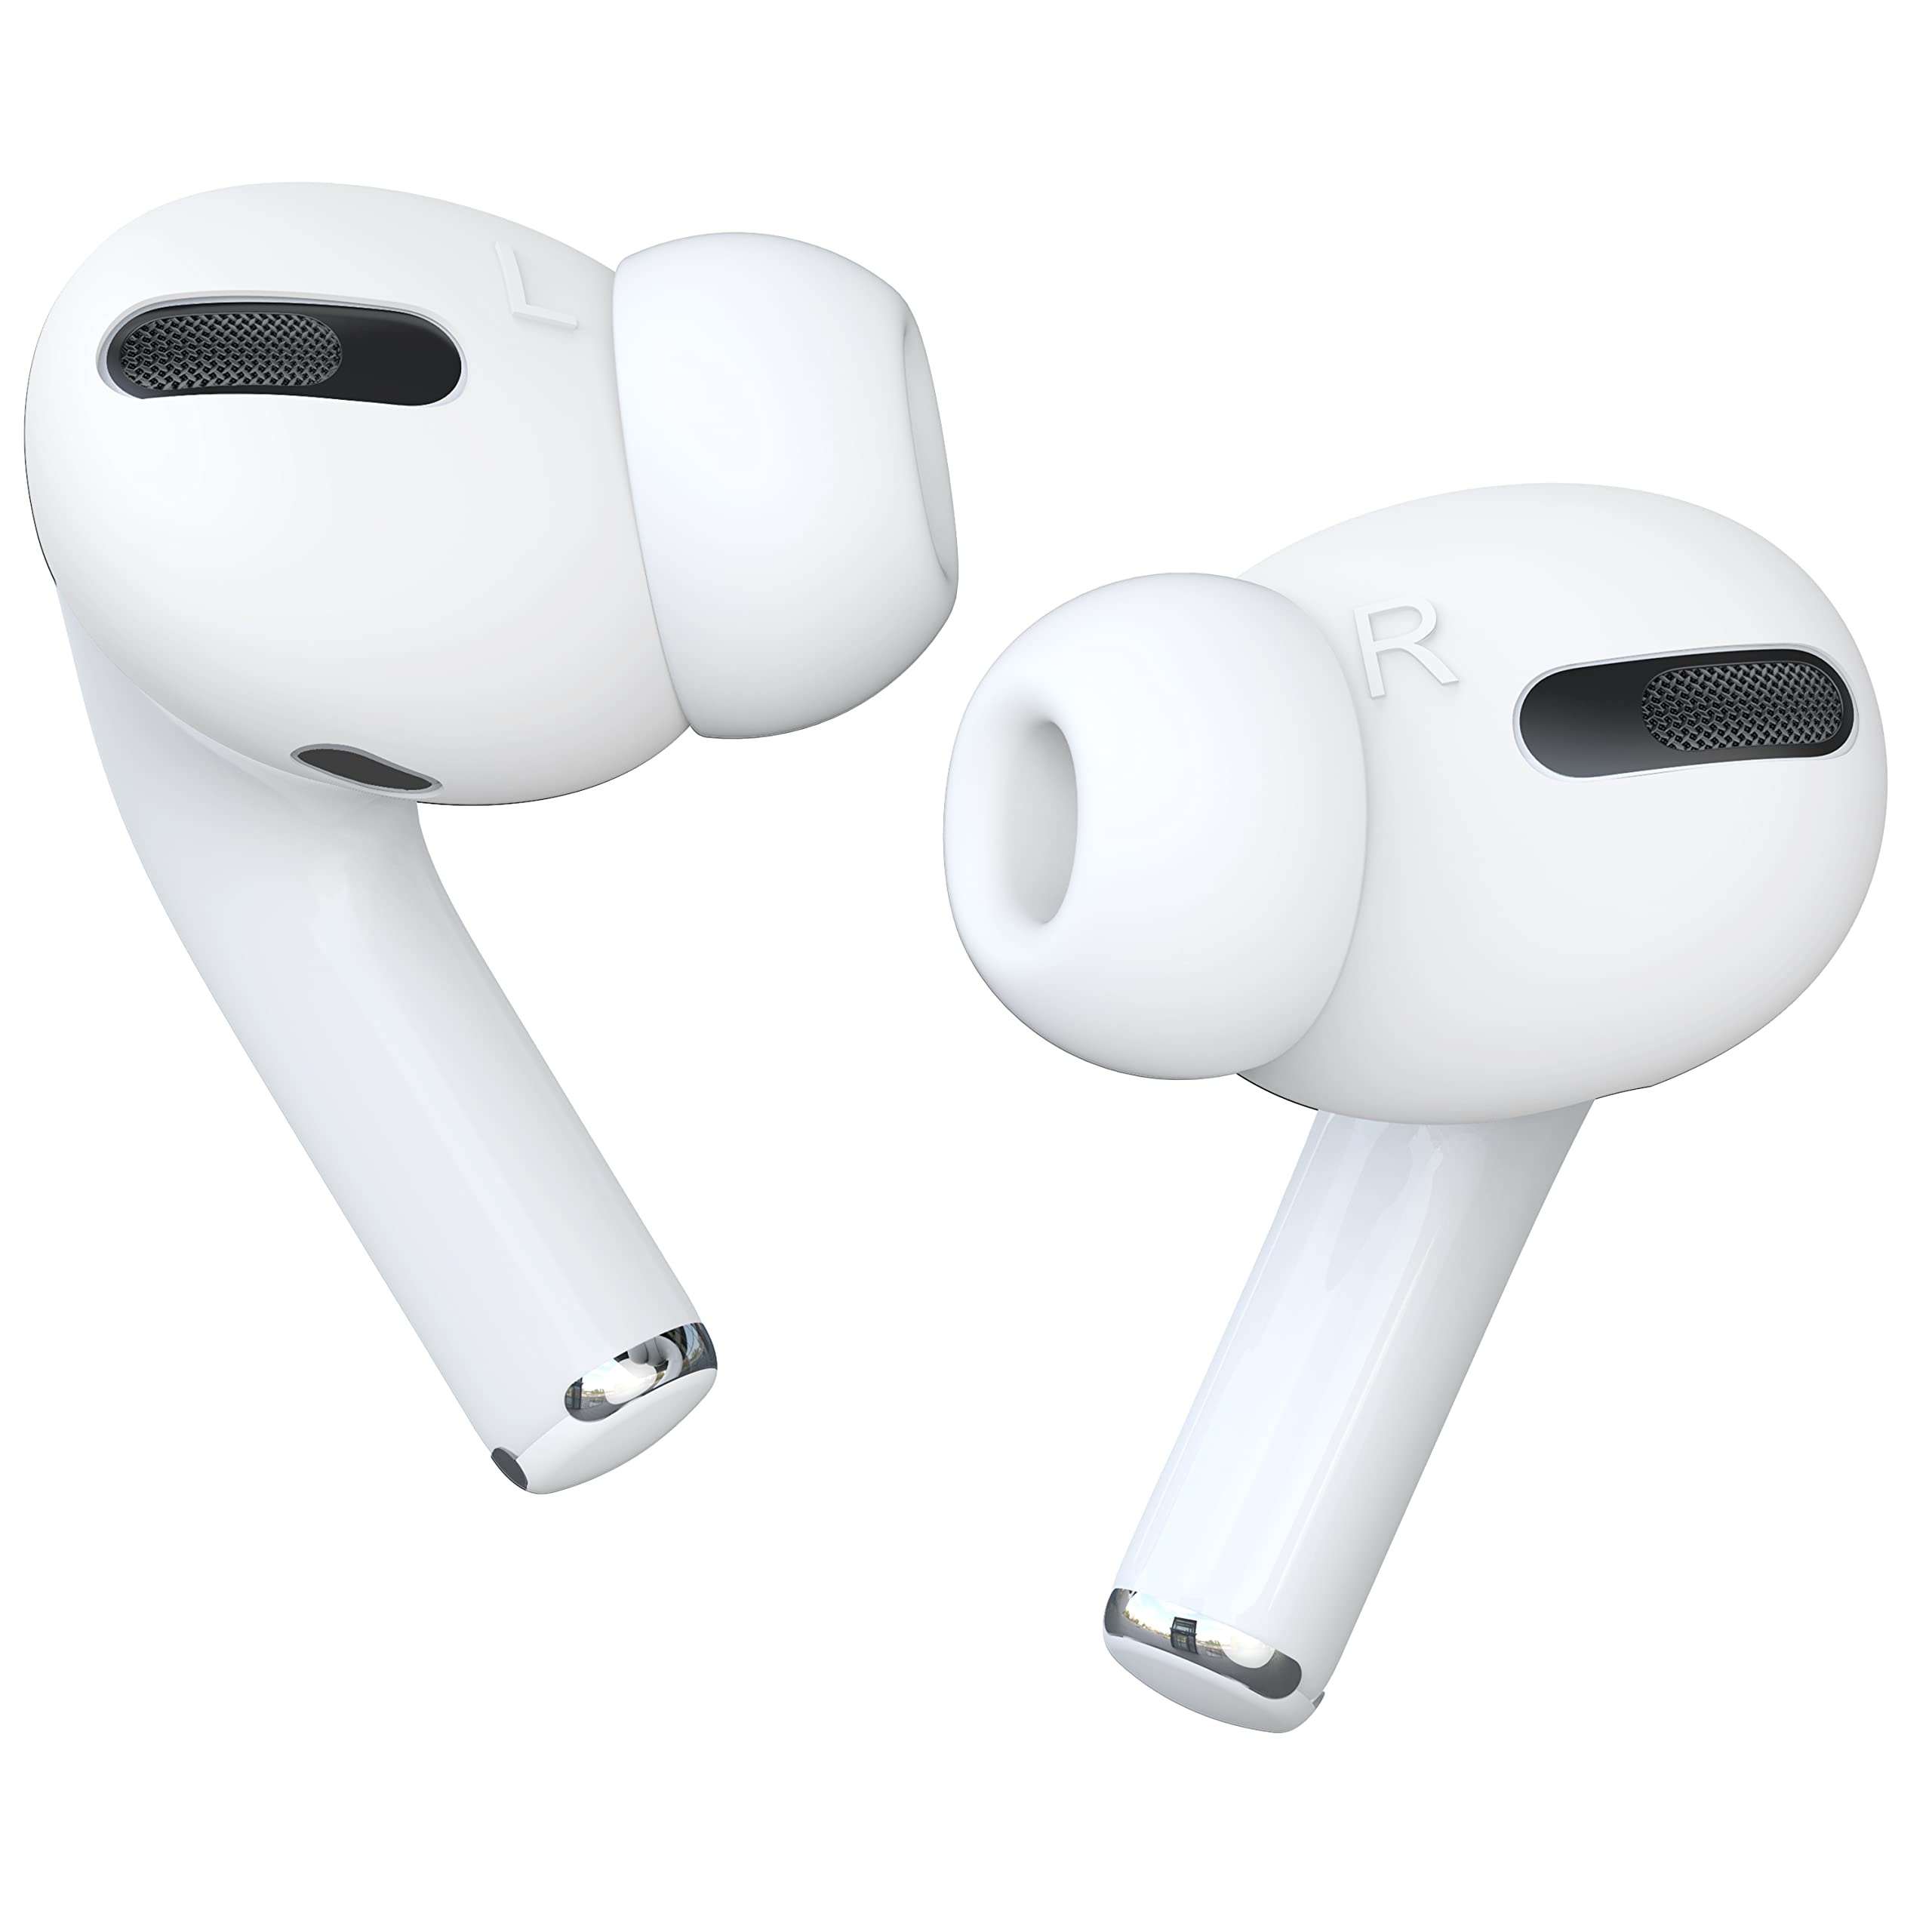 Book Cover DamonLight AirPods Pro Ear Tips [Fit in The Case] 2 Pairs Cover Designed for Apple AirPods Pro , Anti Slip Silicone Cover, Dust and Scratch Free, Comfortable Listening - White